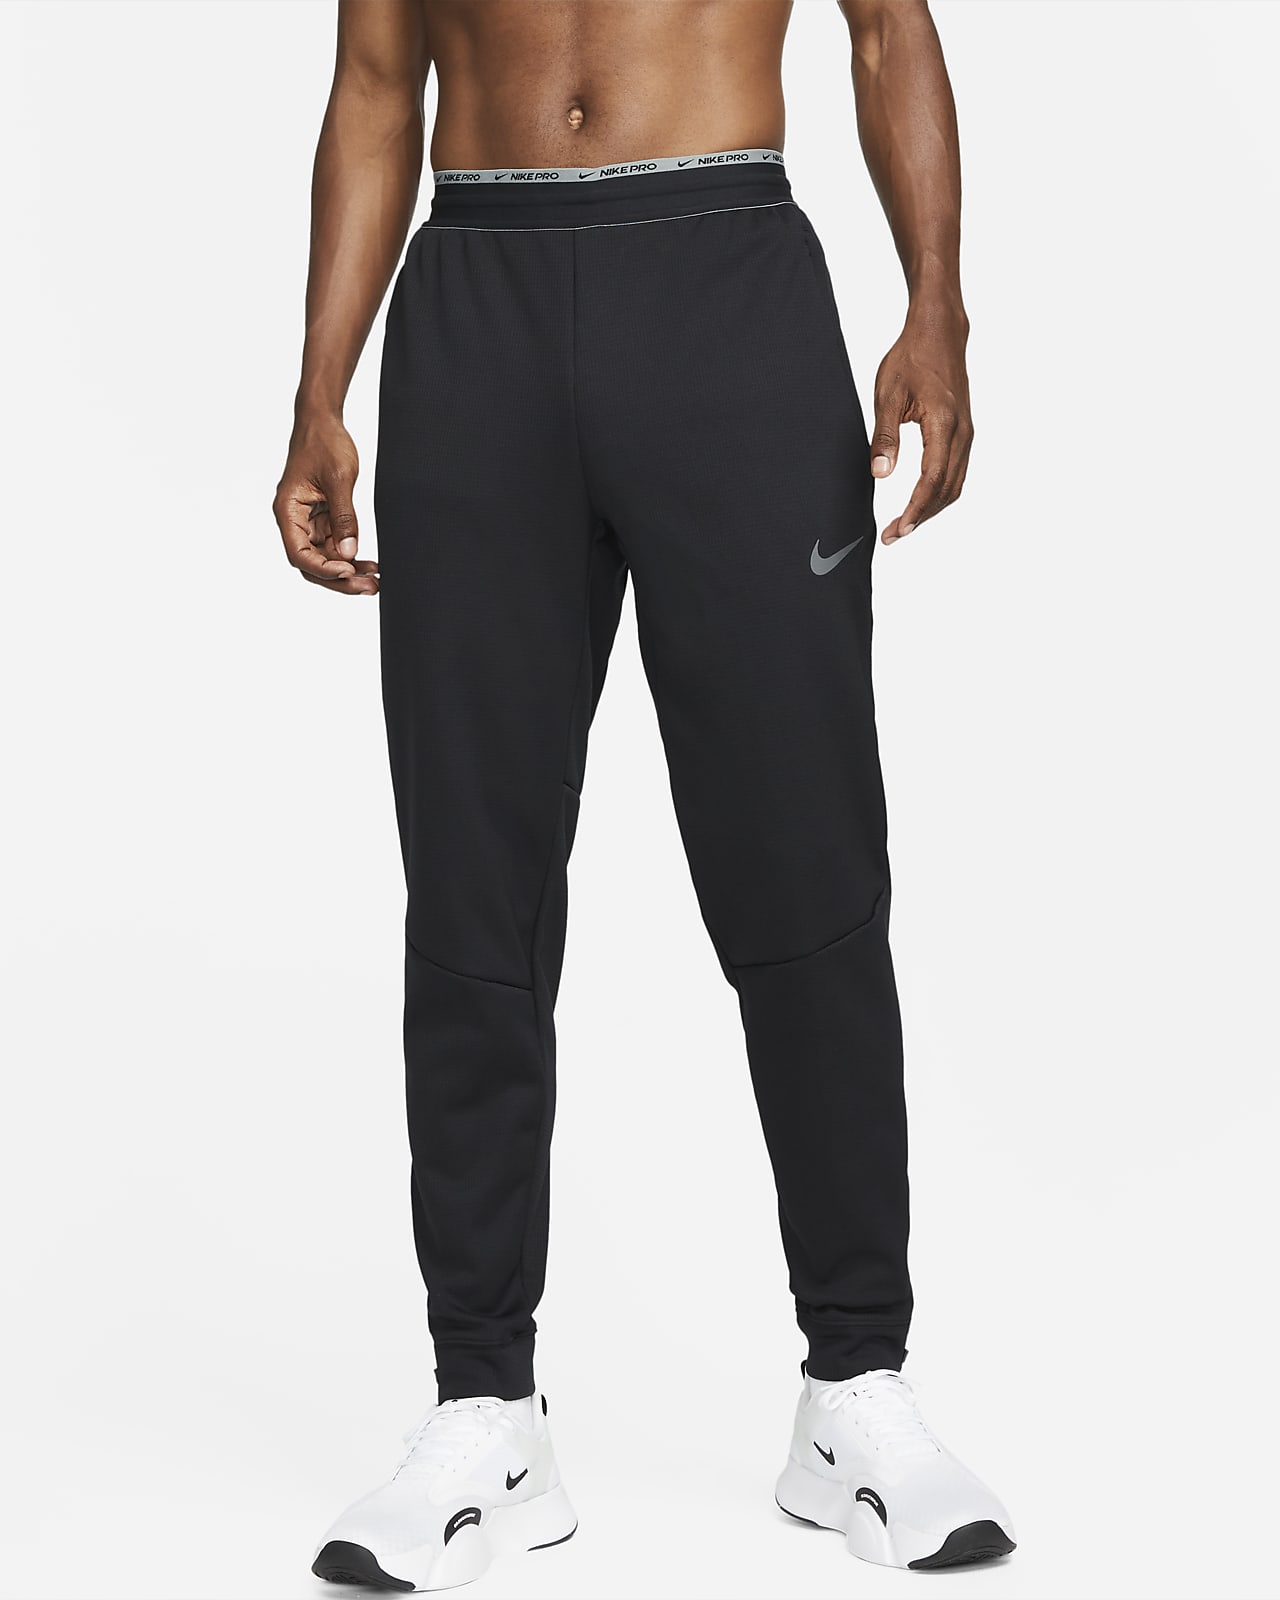 Nike Therma Sphere Men's Therma-FIT Fitness Pants